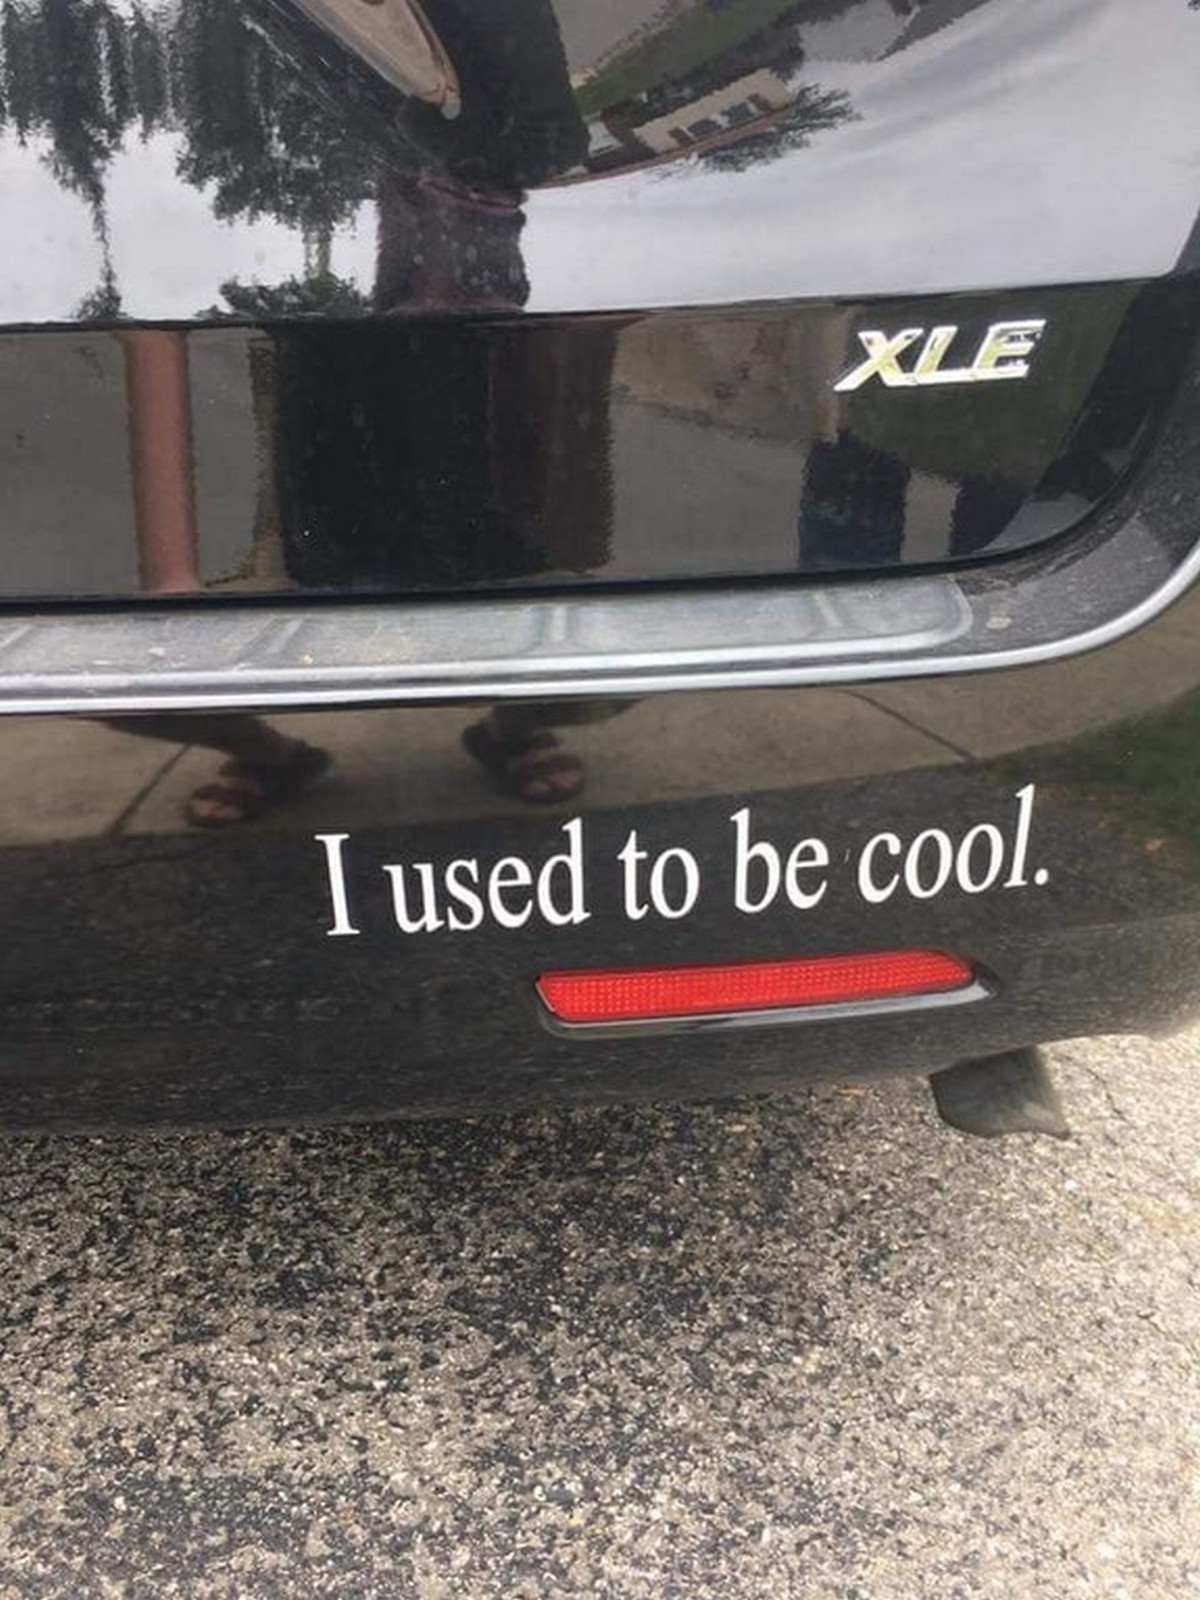 27 Funny Bumper Stickers - When the time comes to buy a minivan...